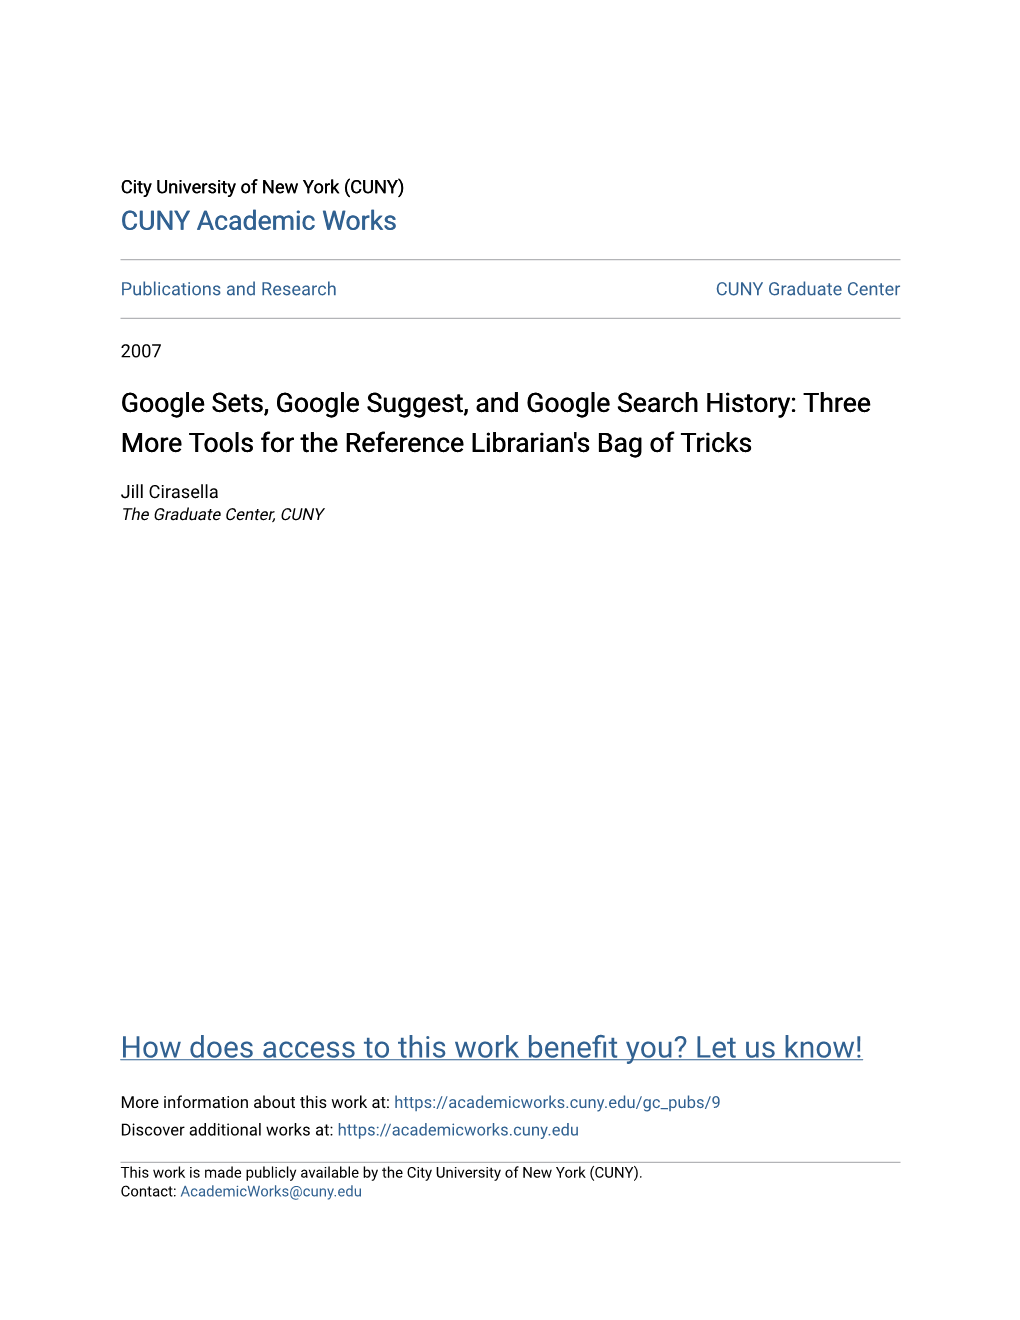 Google Sets, Google Suggest, and Google Search History: Three More Tools for the Reference Librarian's Bag of Tricks